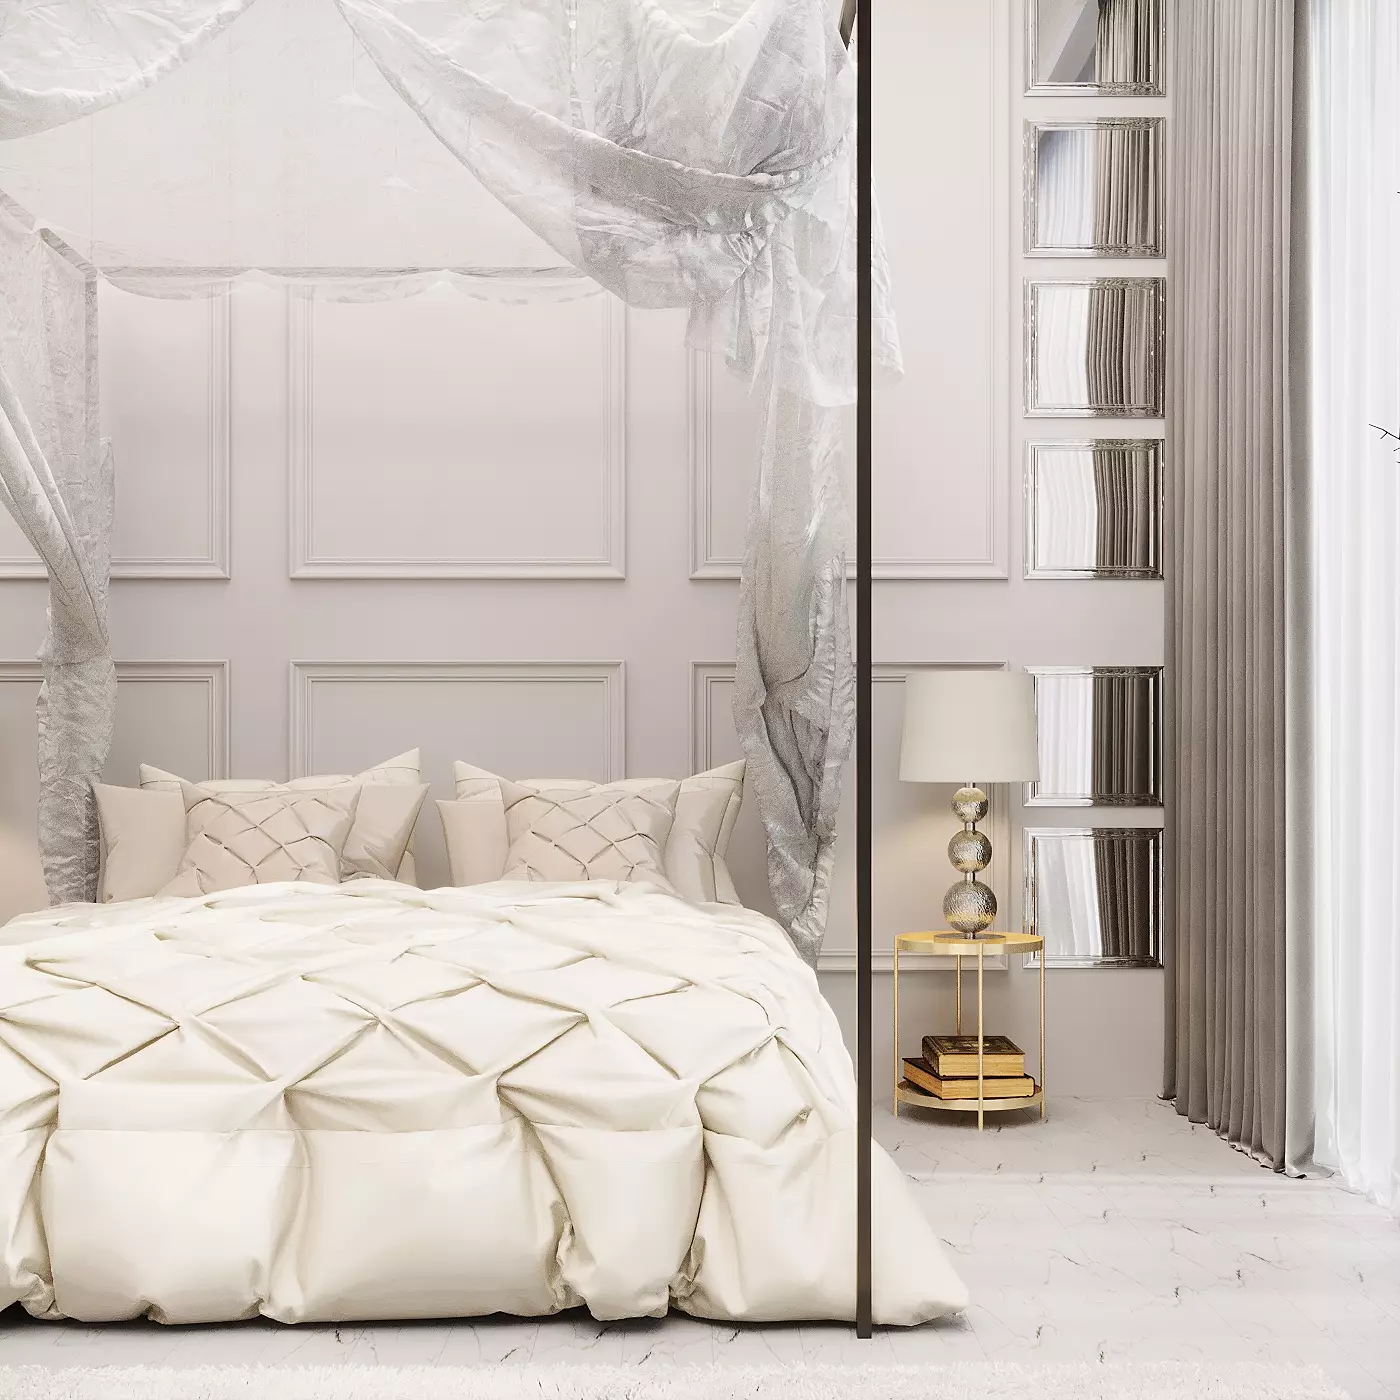 Reflective surfaces bring new sparkle to the softly neutral sleeping area